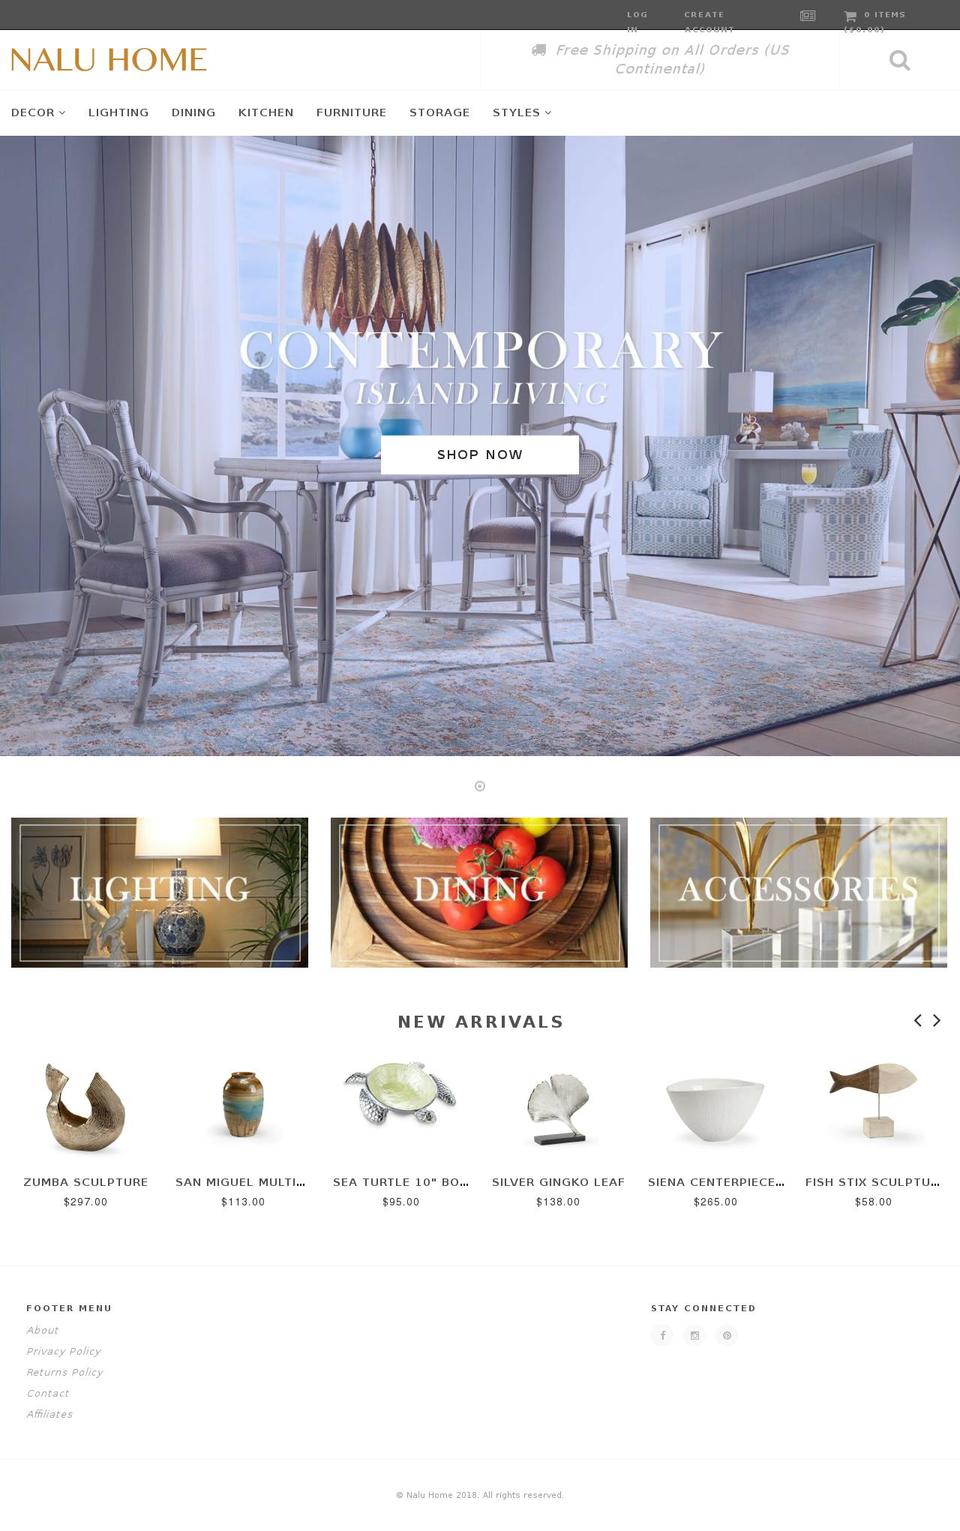 annabelle-v1-2 Shopify theme site example naluhome.com